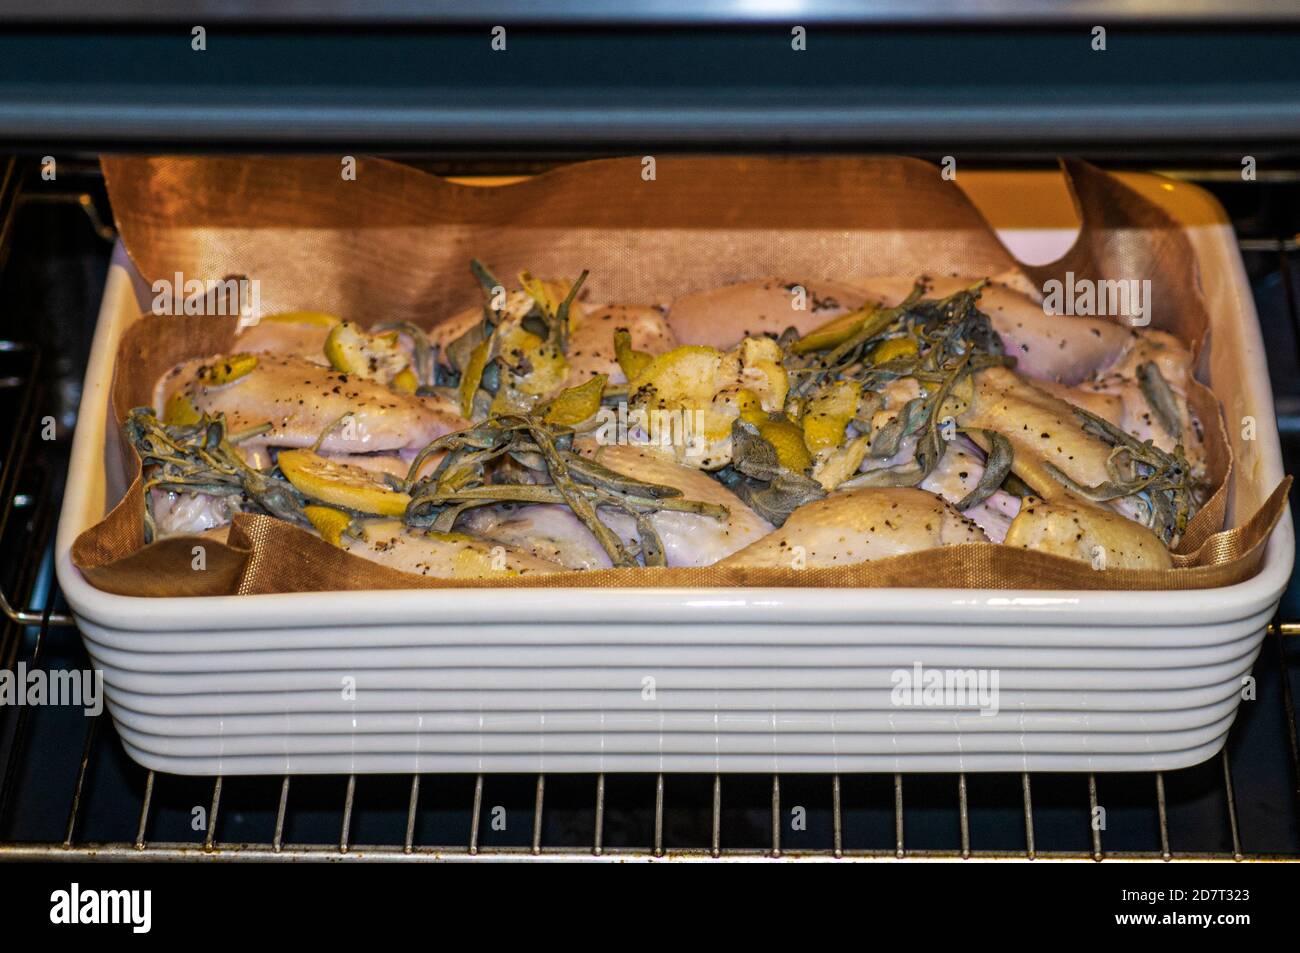 Chicken grilling in an oven with sage and lemon peels Stock Photo